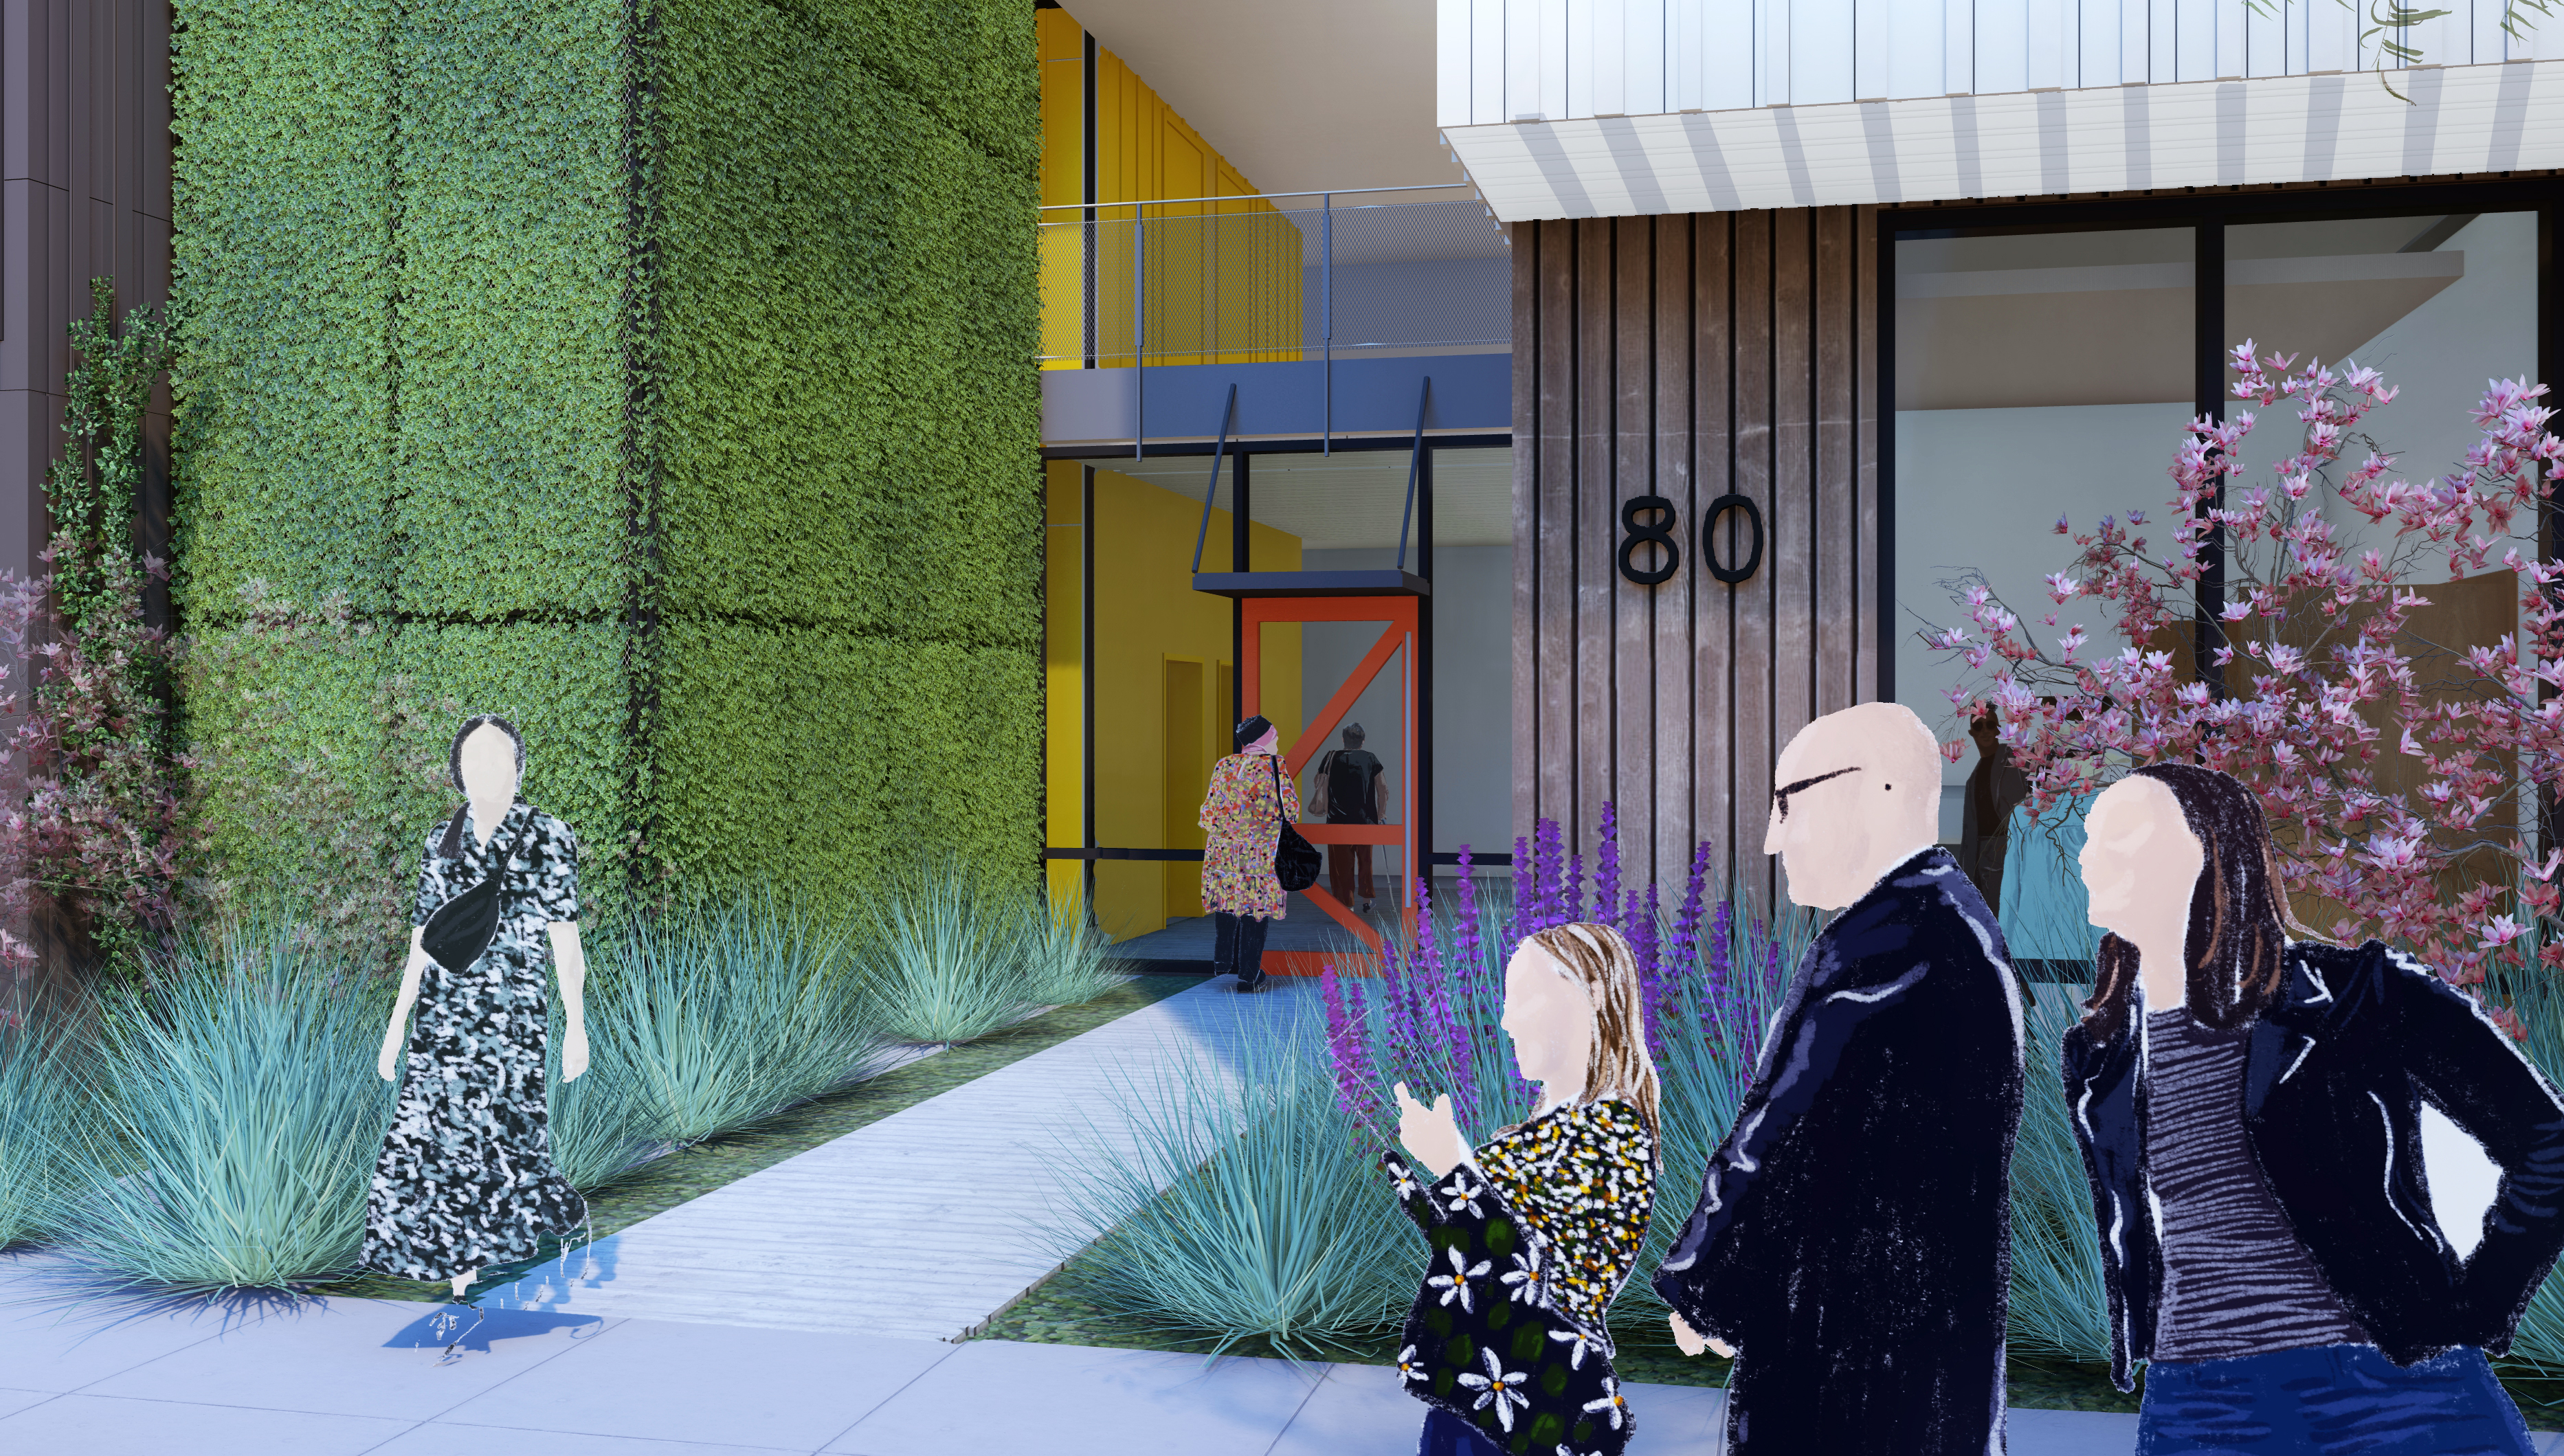 Rendering of the A1 building entrance for Midway Village Phase 1 in Daly City, Ca.